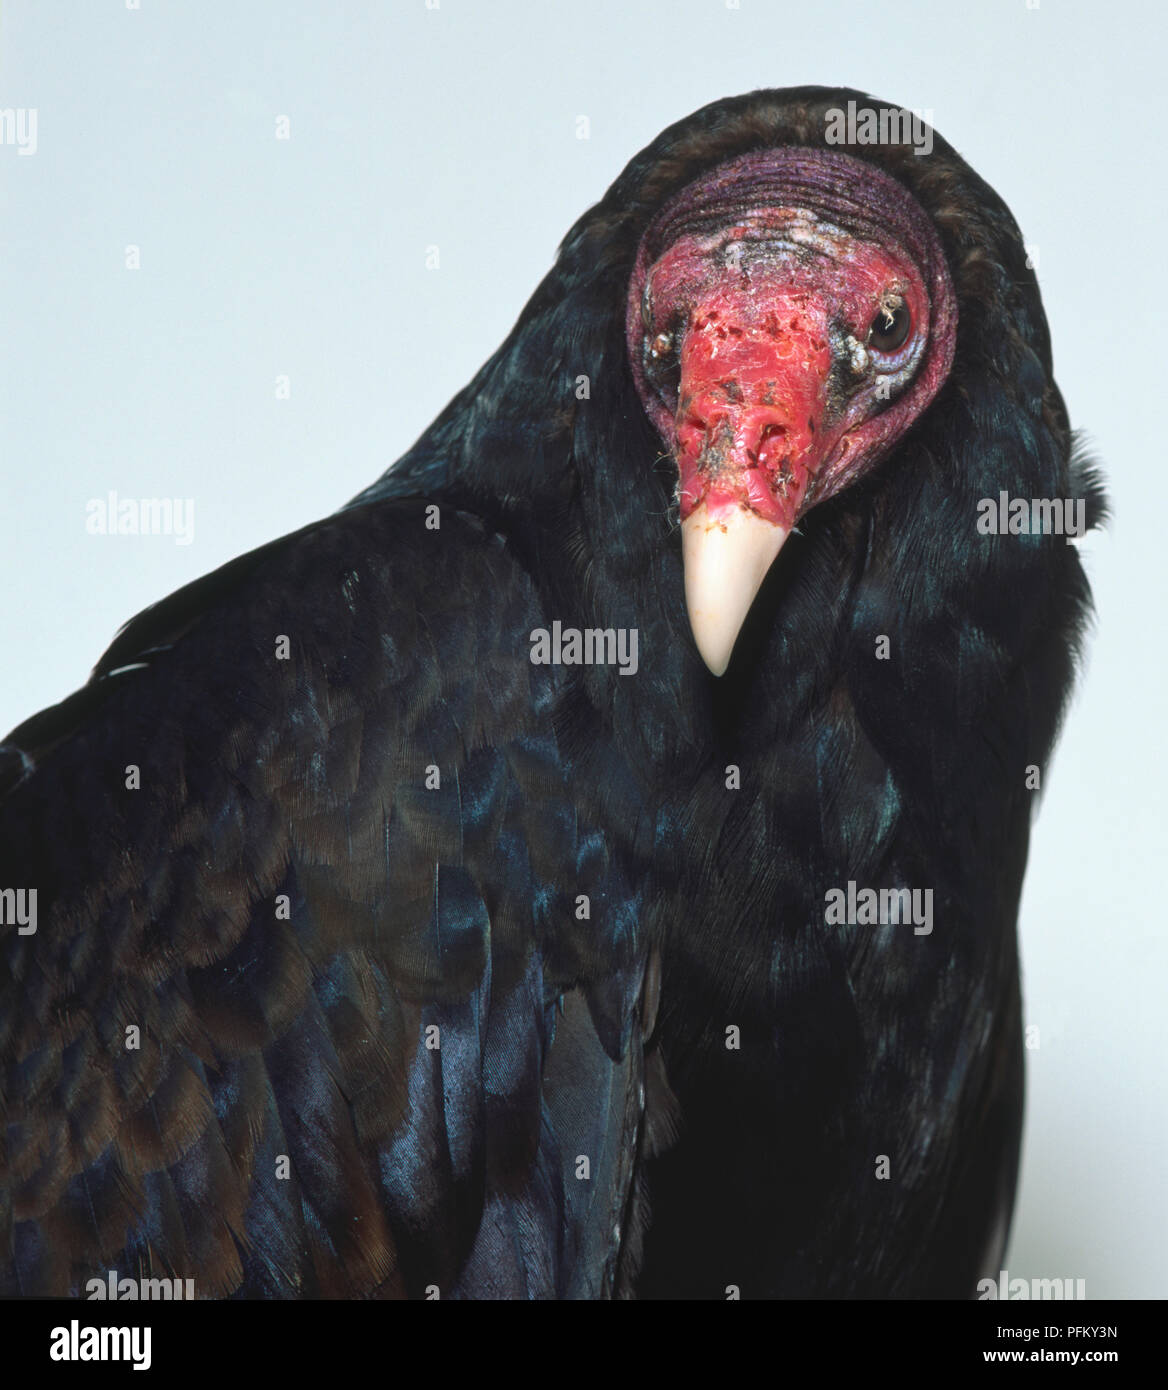 Head close-up of a Turkey Vulture facing forwards showing the red, scaly, dry skin of the head. Stock Photo